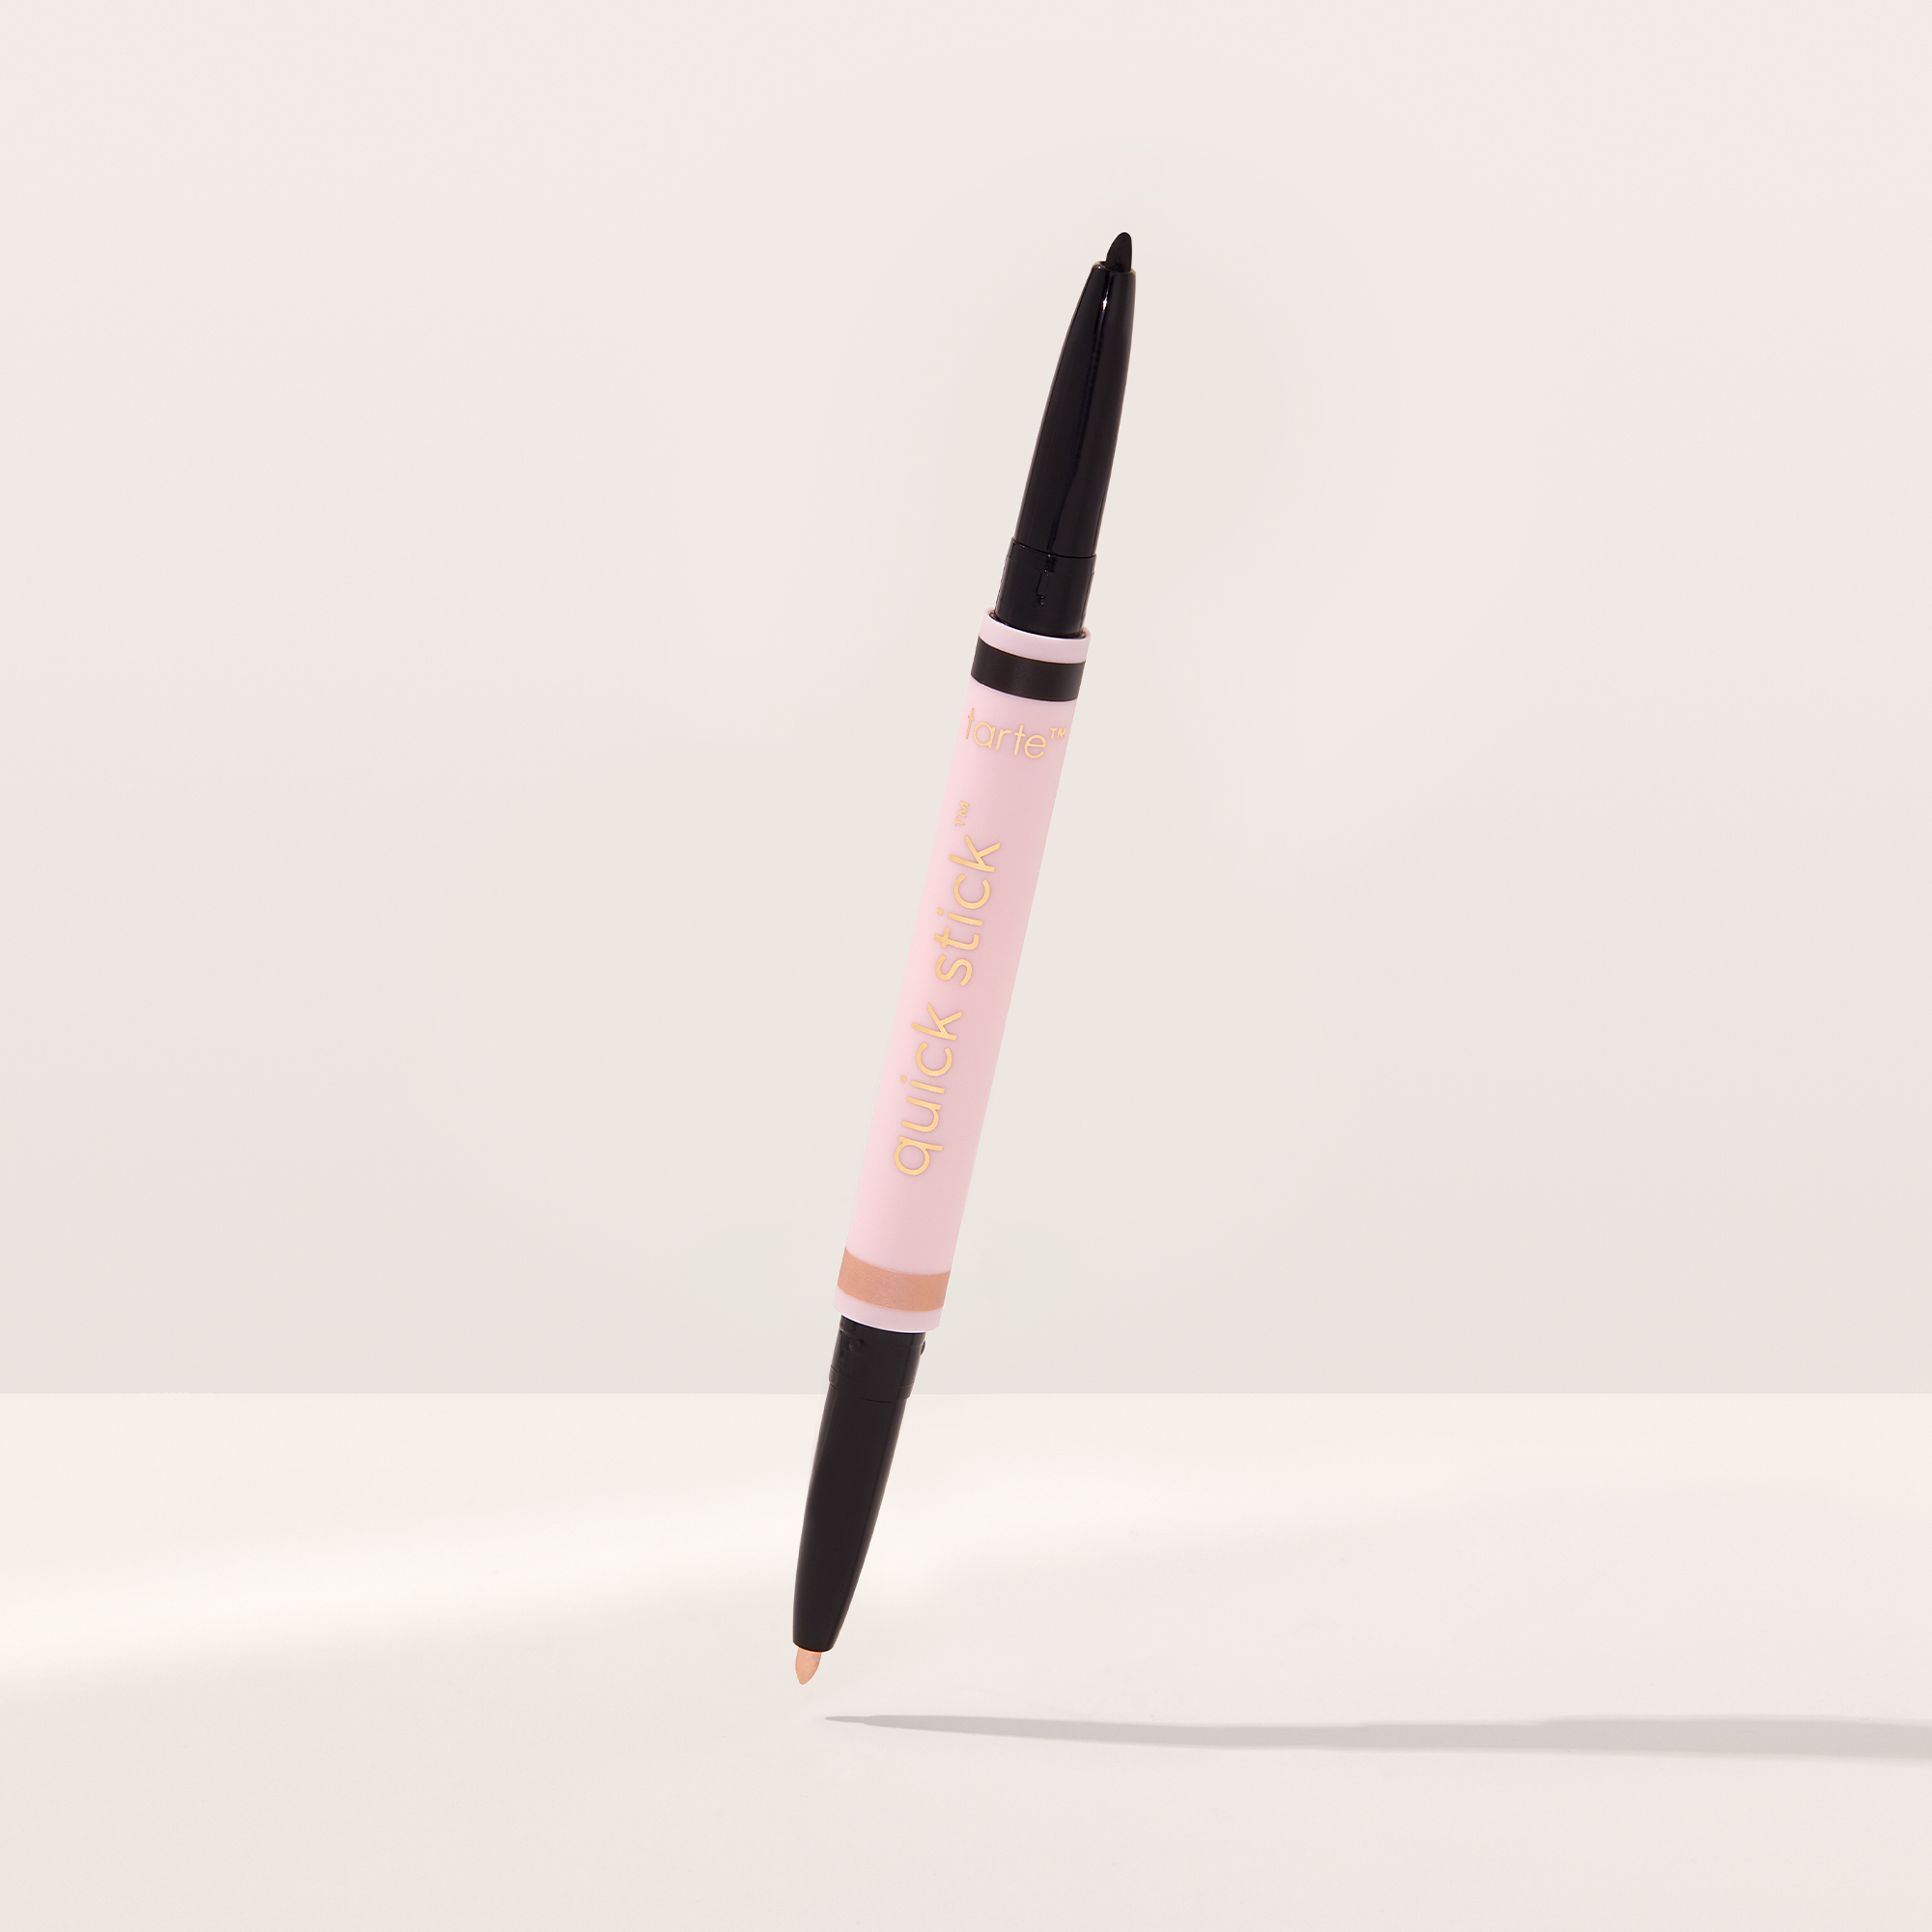 Tarte Cosmetics Quick Stickâ?¢ Double-ended Gel Liner In White